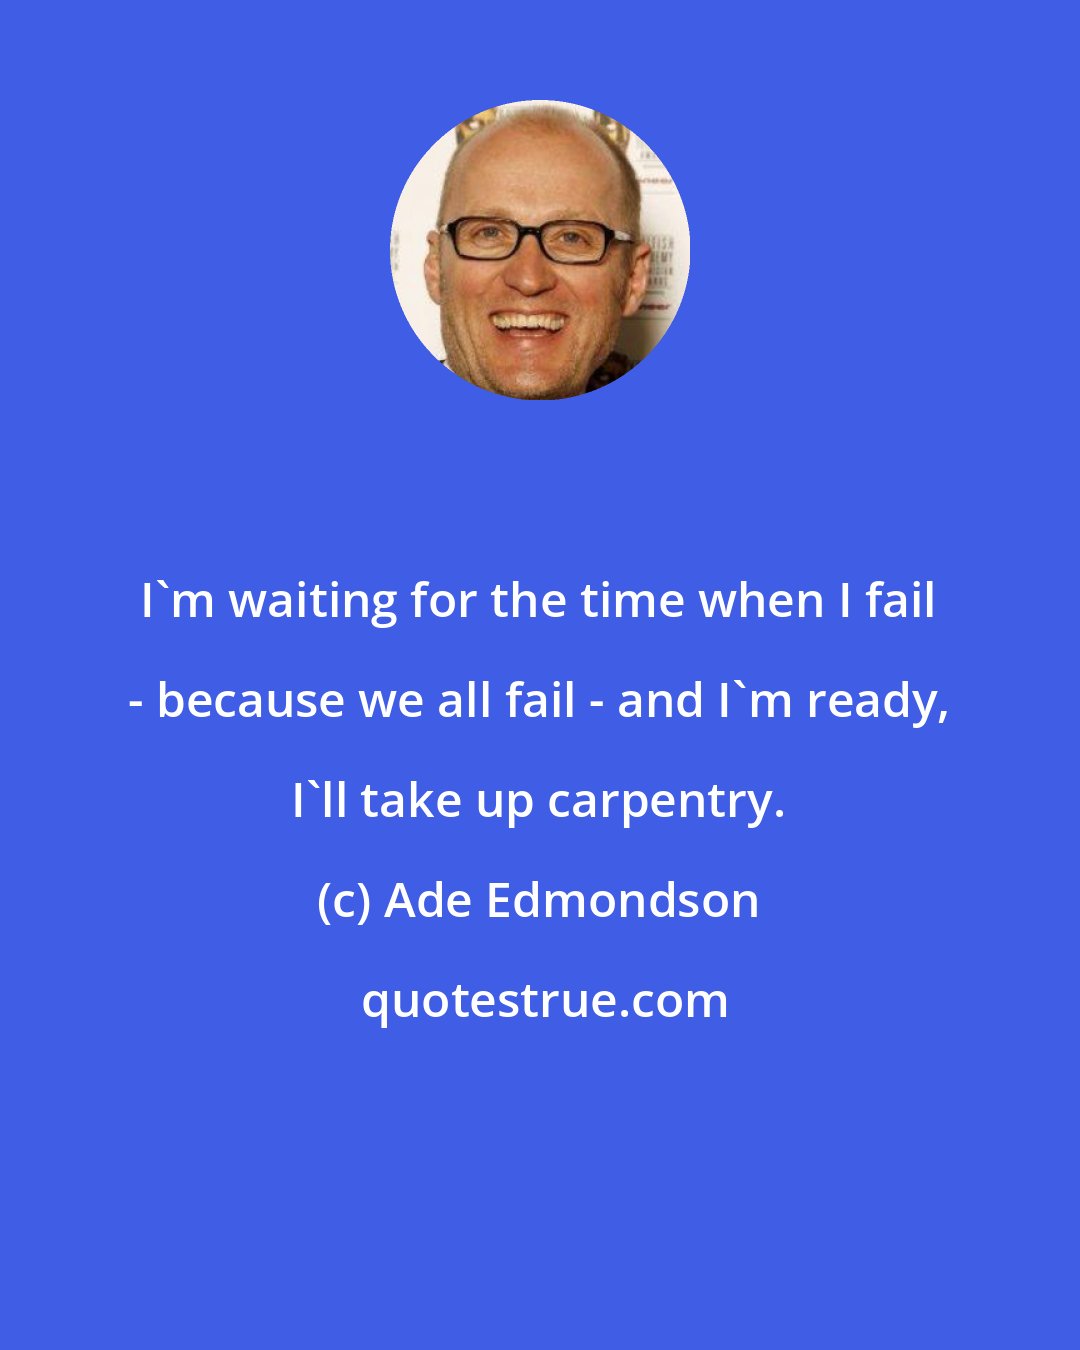 Ade Edmondson: I'm waiting for the time when I fail - because we all fail - and I'm ready, I'll take up carpentry.